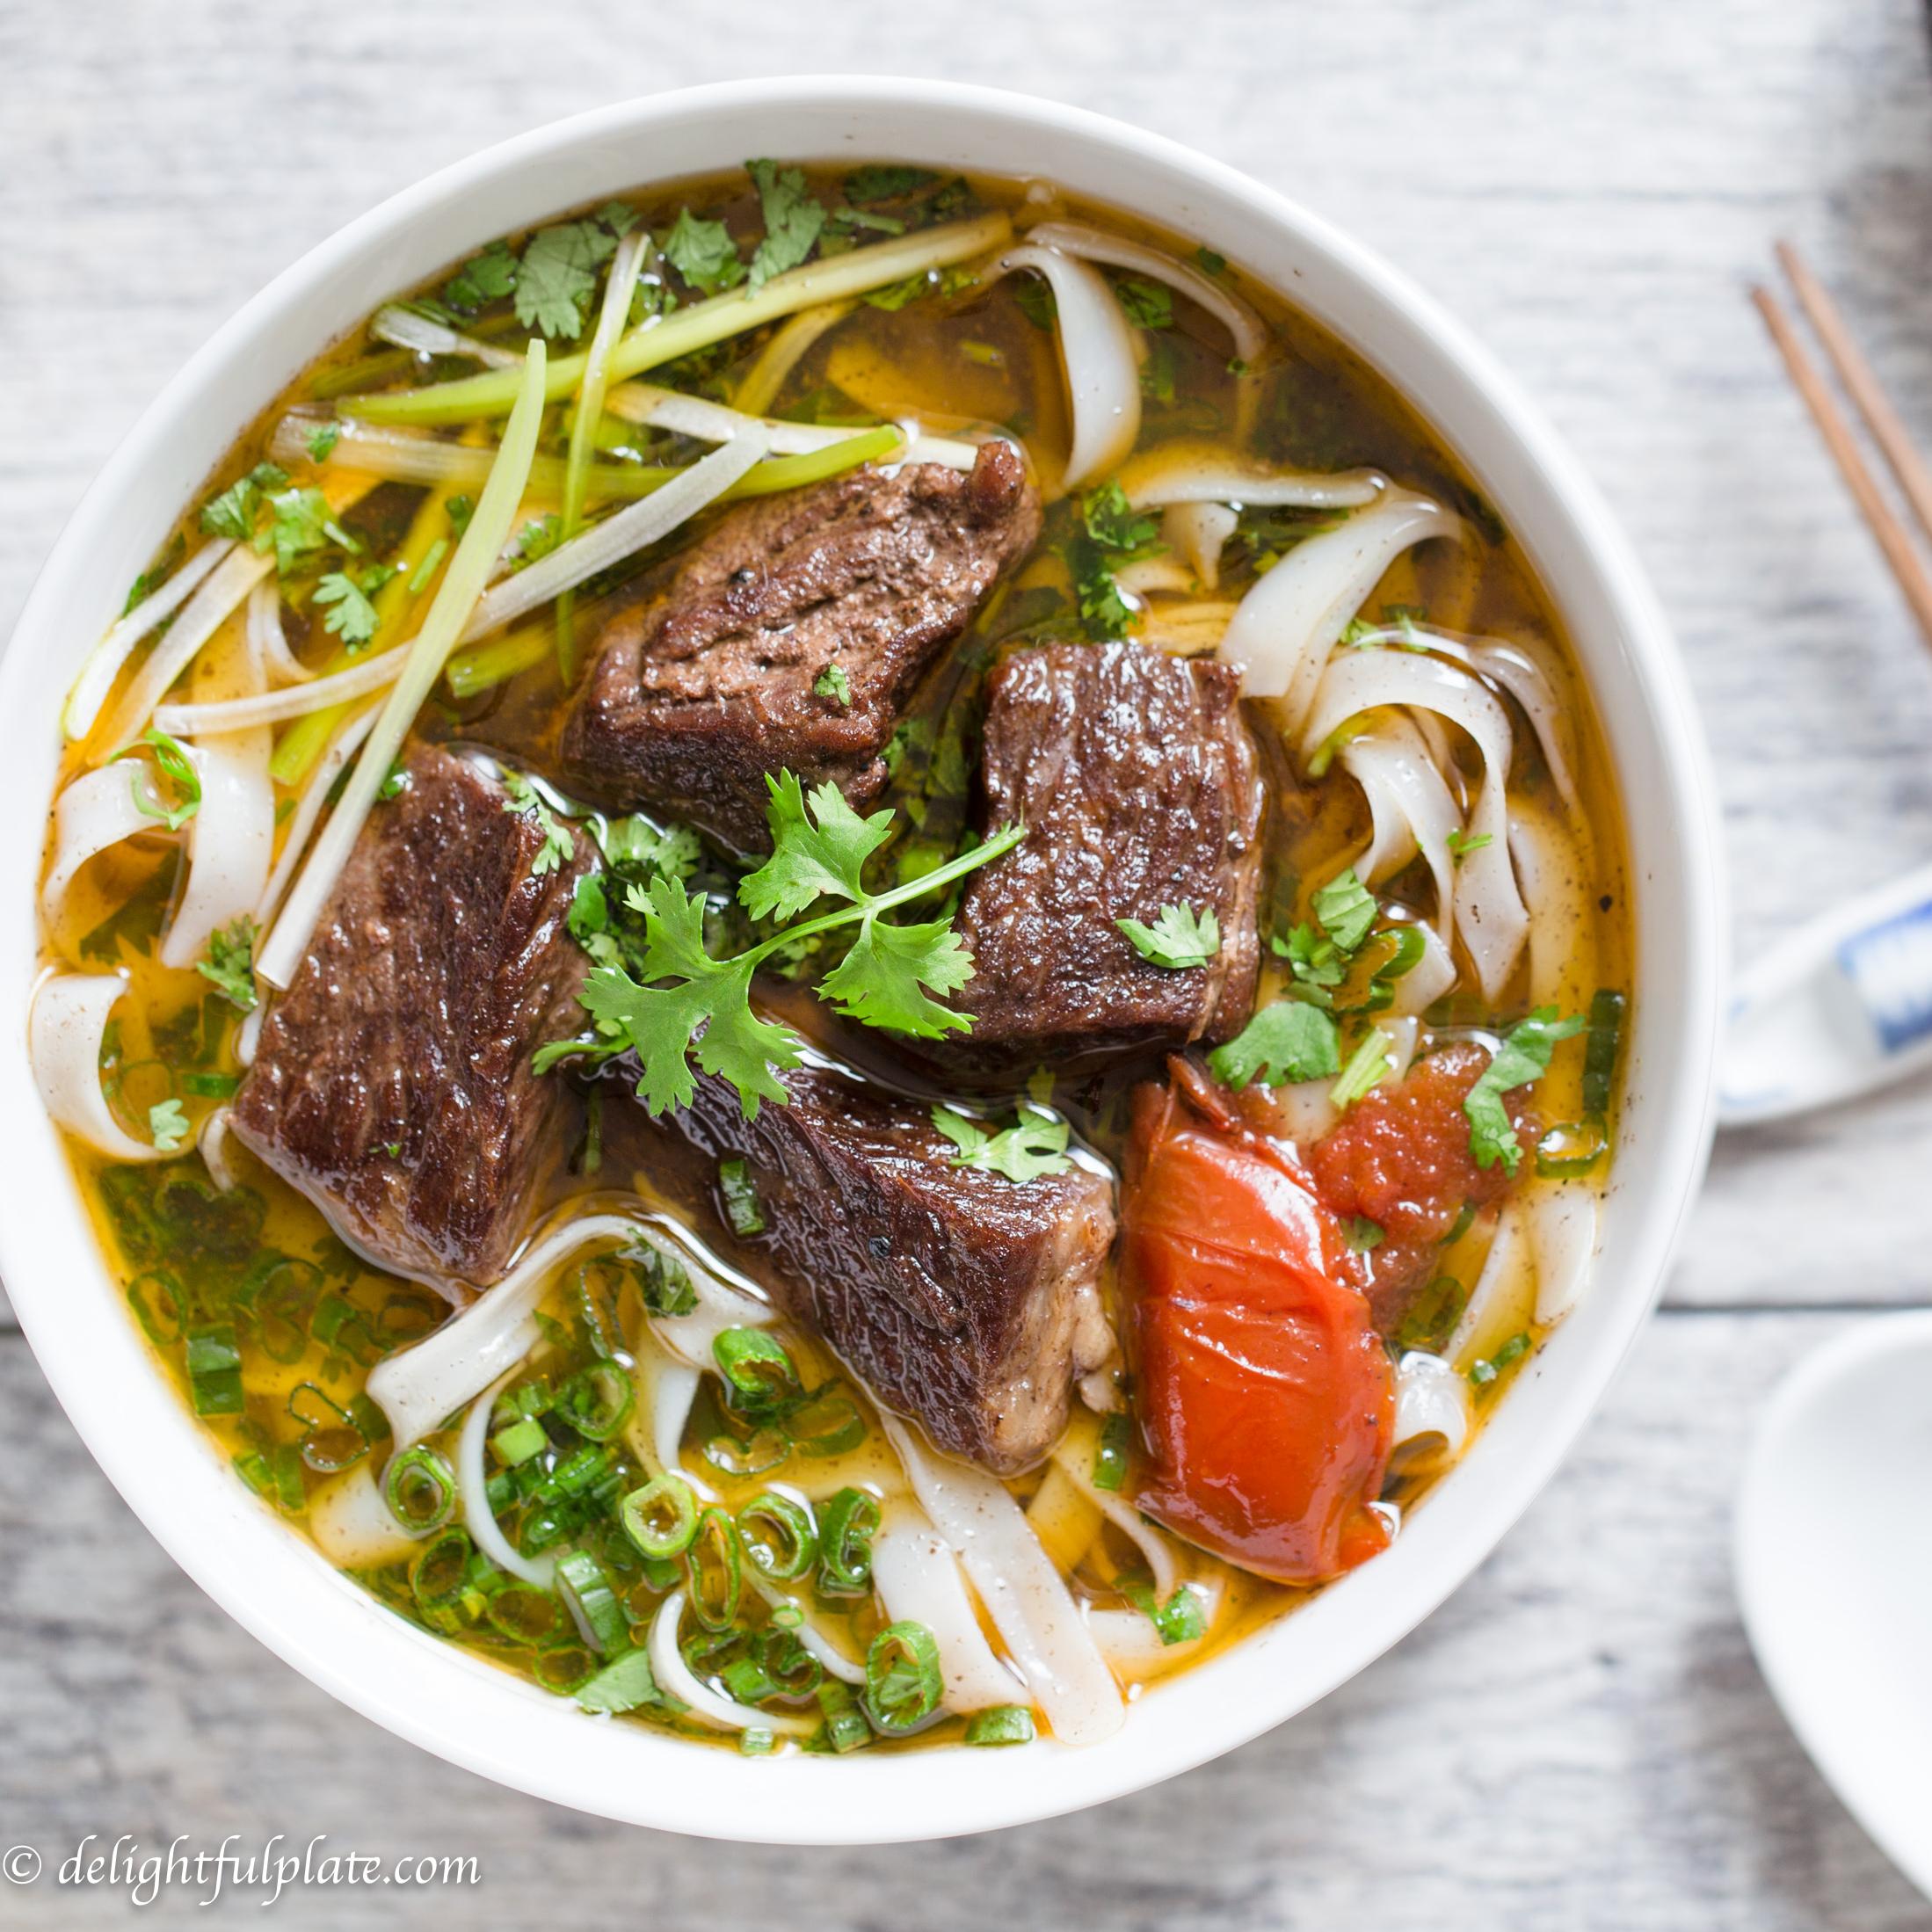  A bowl of comfort and flavor: Vietnamese beef noodle soup